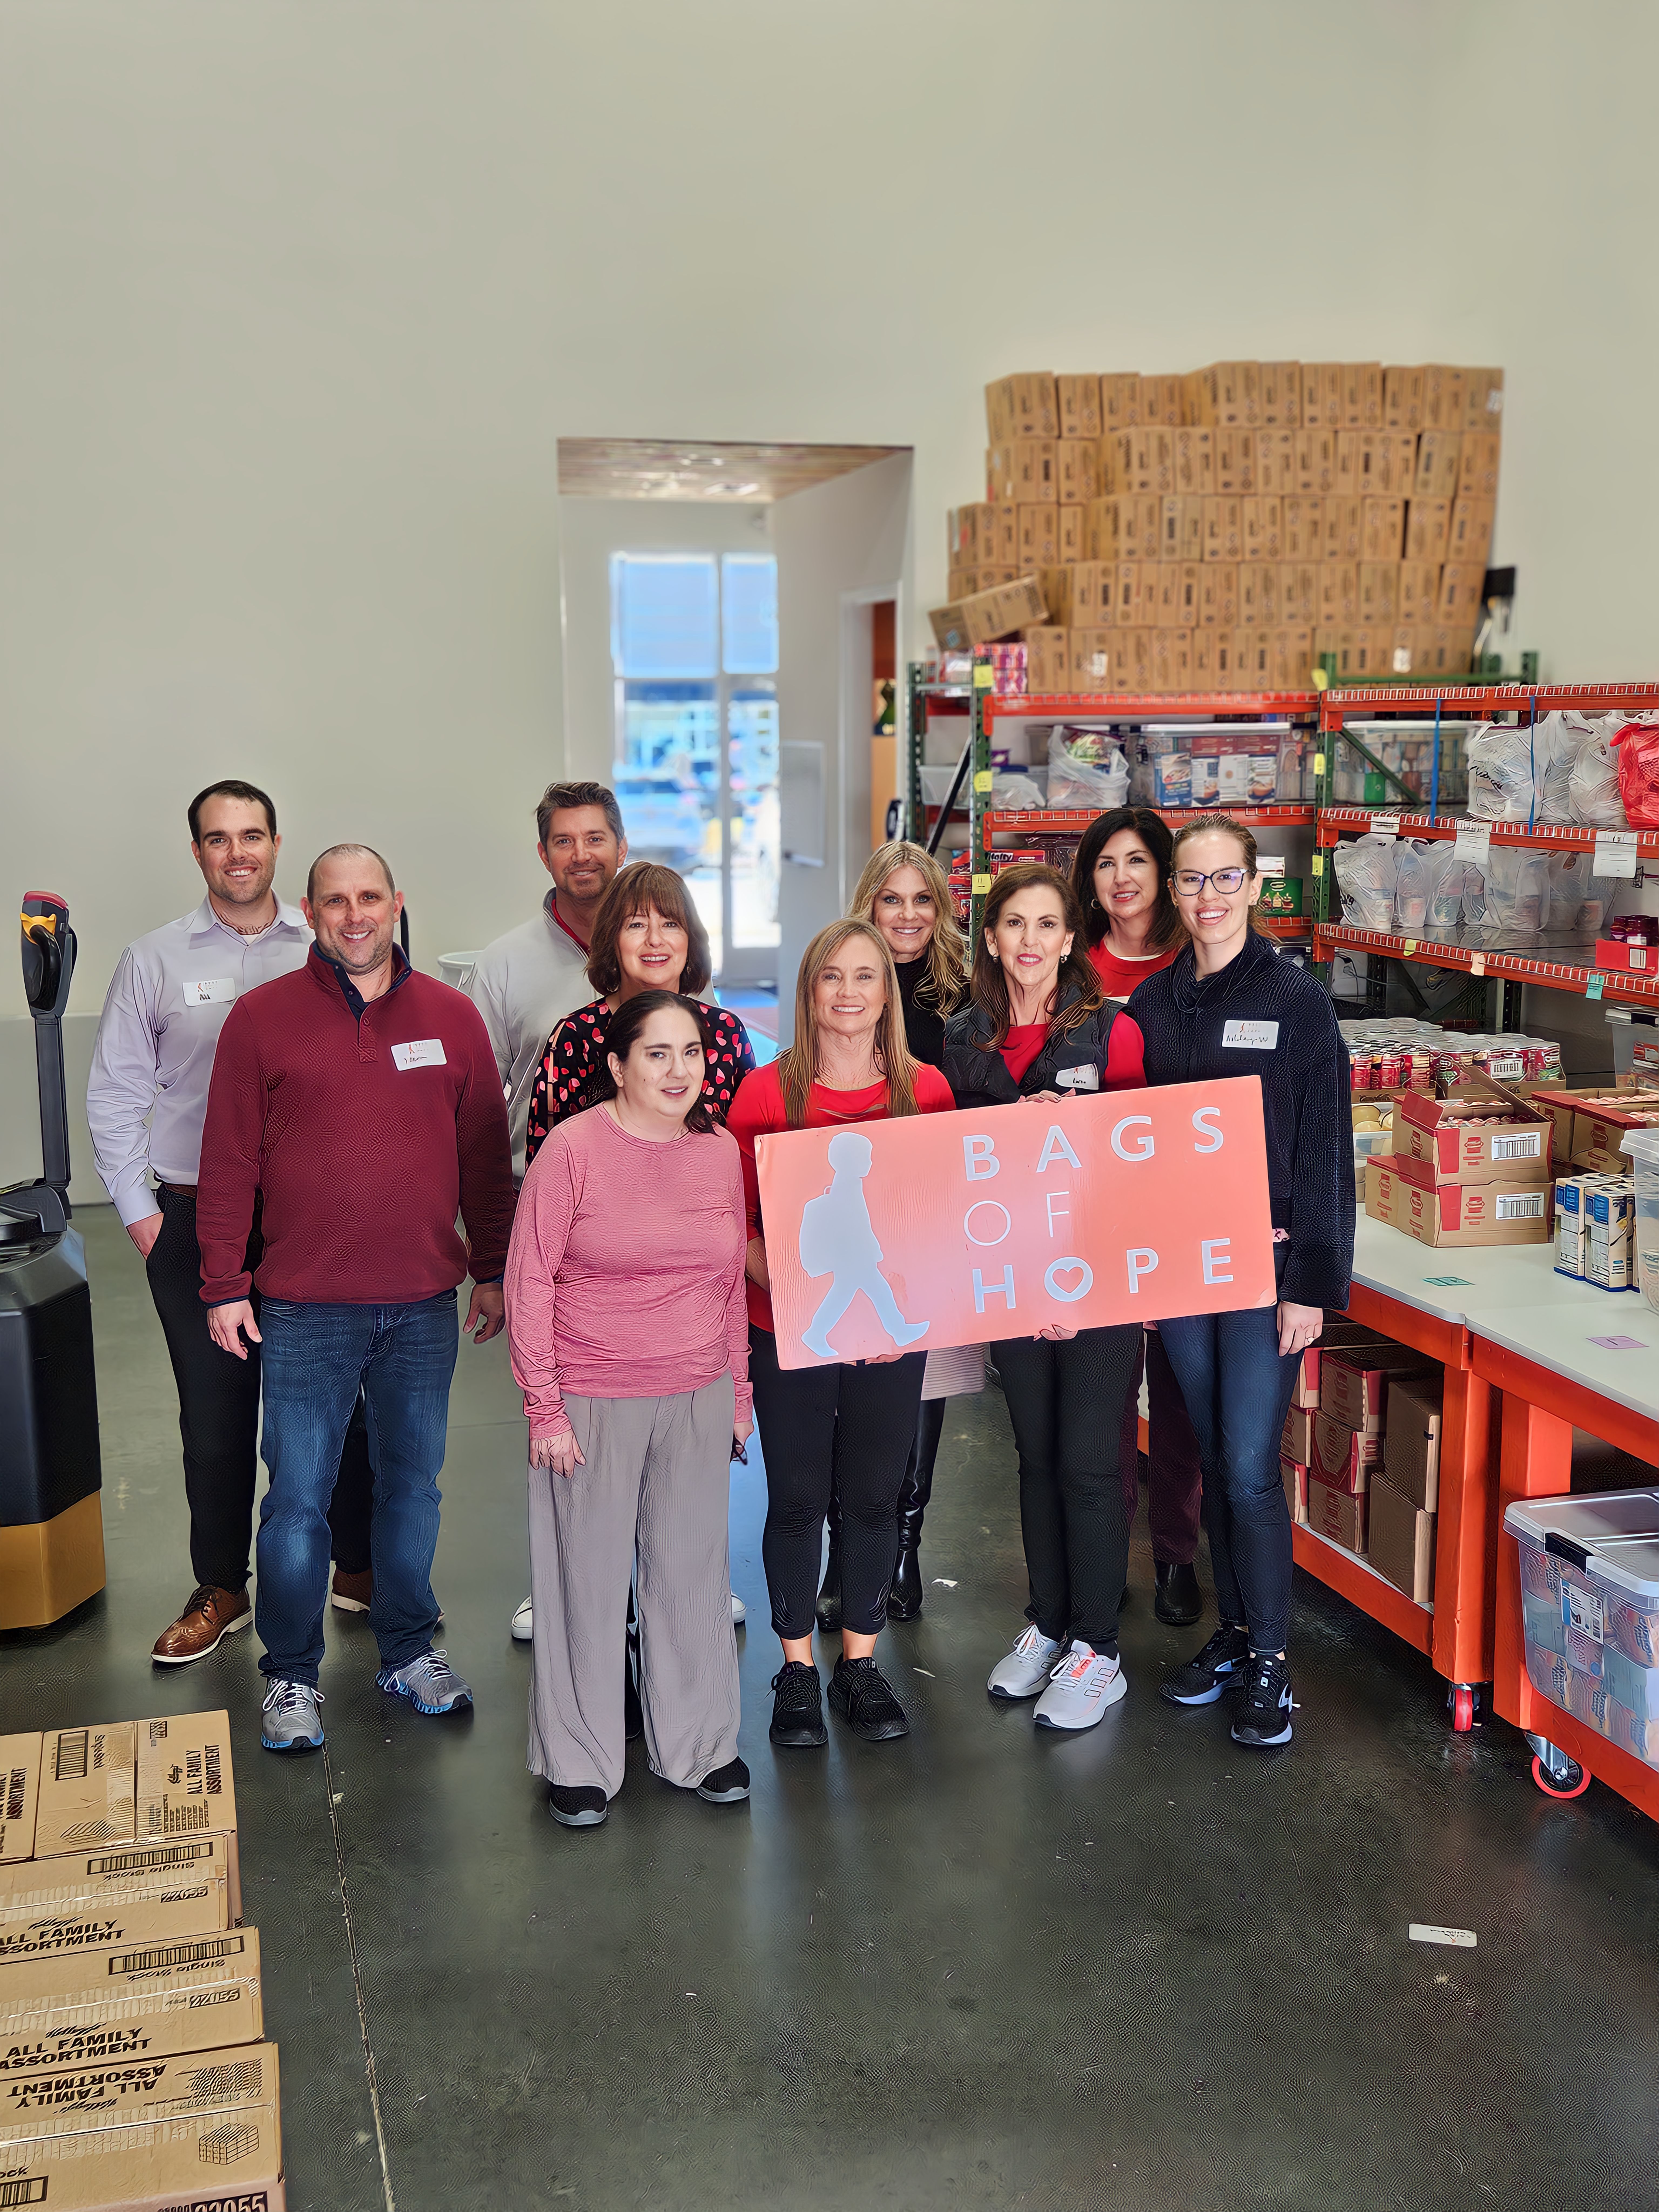 Spreading Love: Cornerstone Wealth Volunteers at Bags of Hope on Valentine's Day